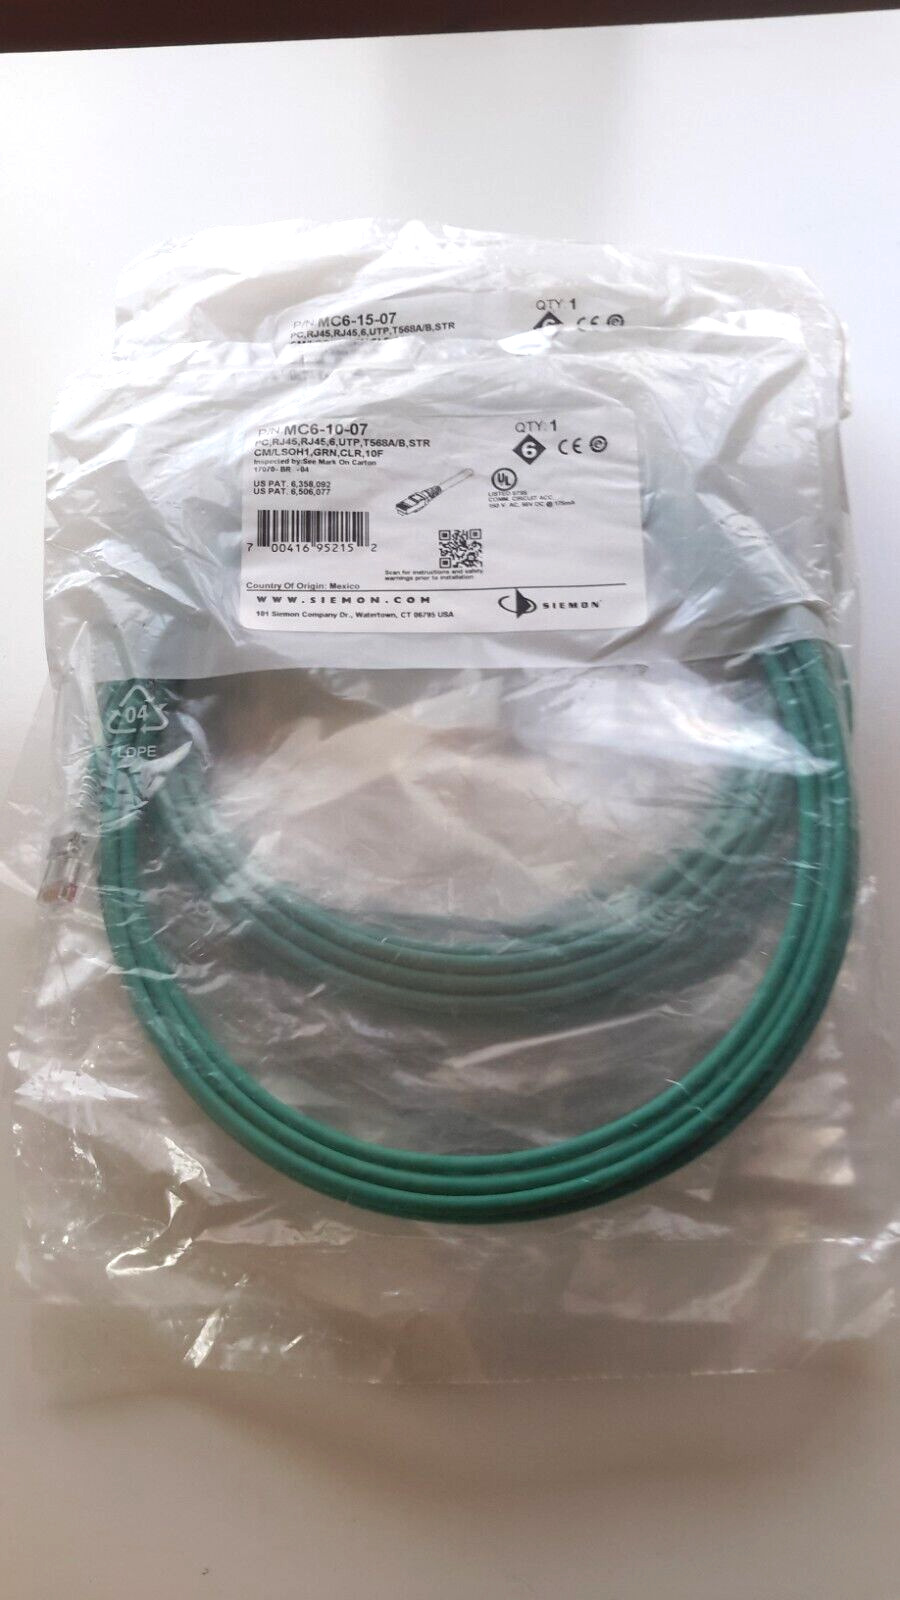 (Lot of 5) 10\' Green Siemon\'s MC6-10-07 Category 6 Patch Cables